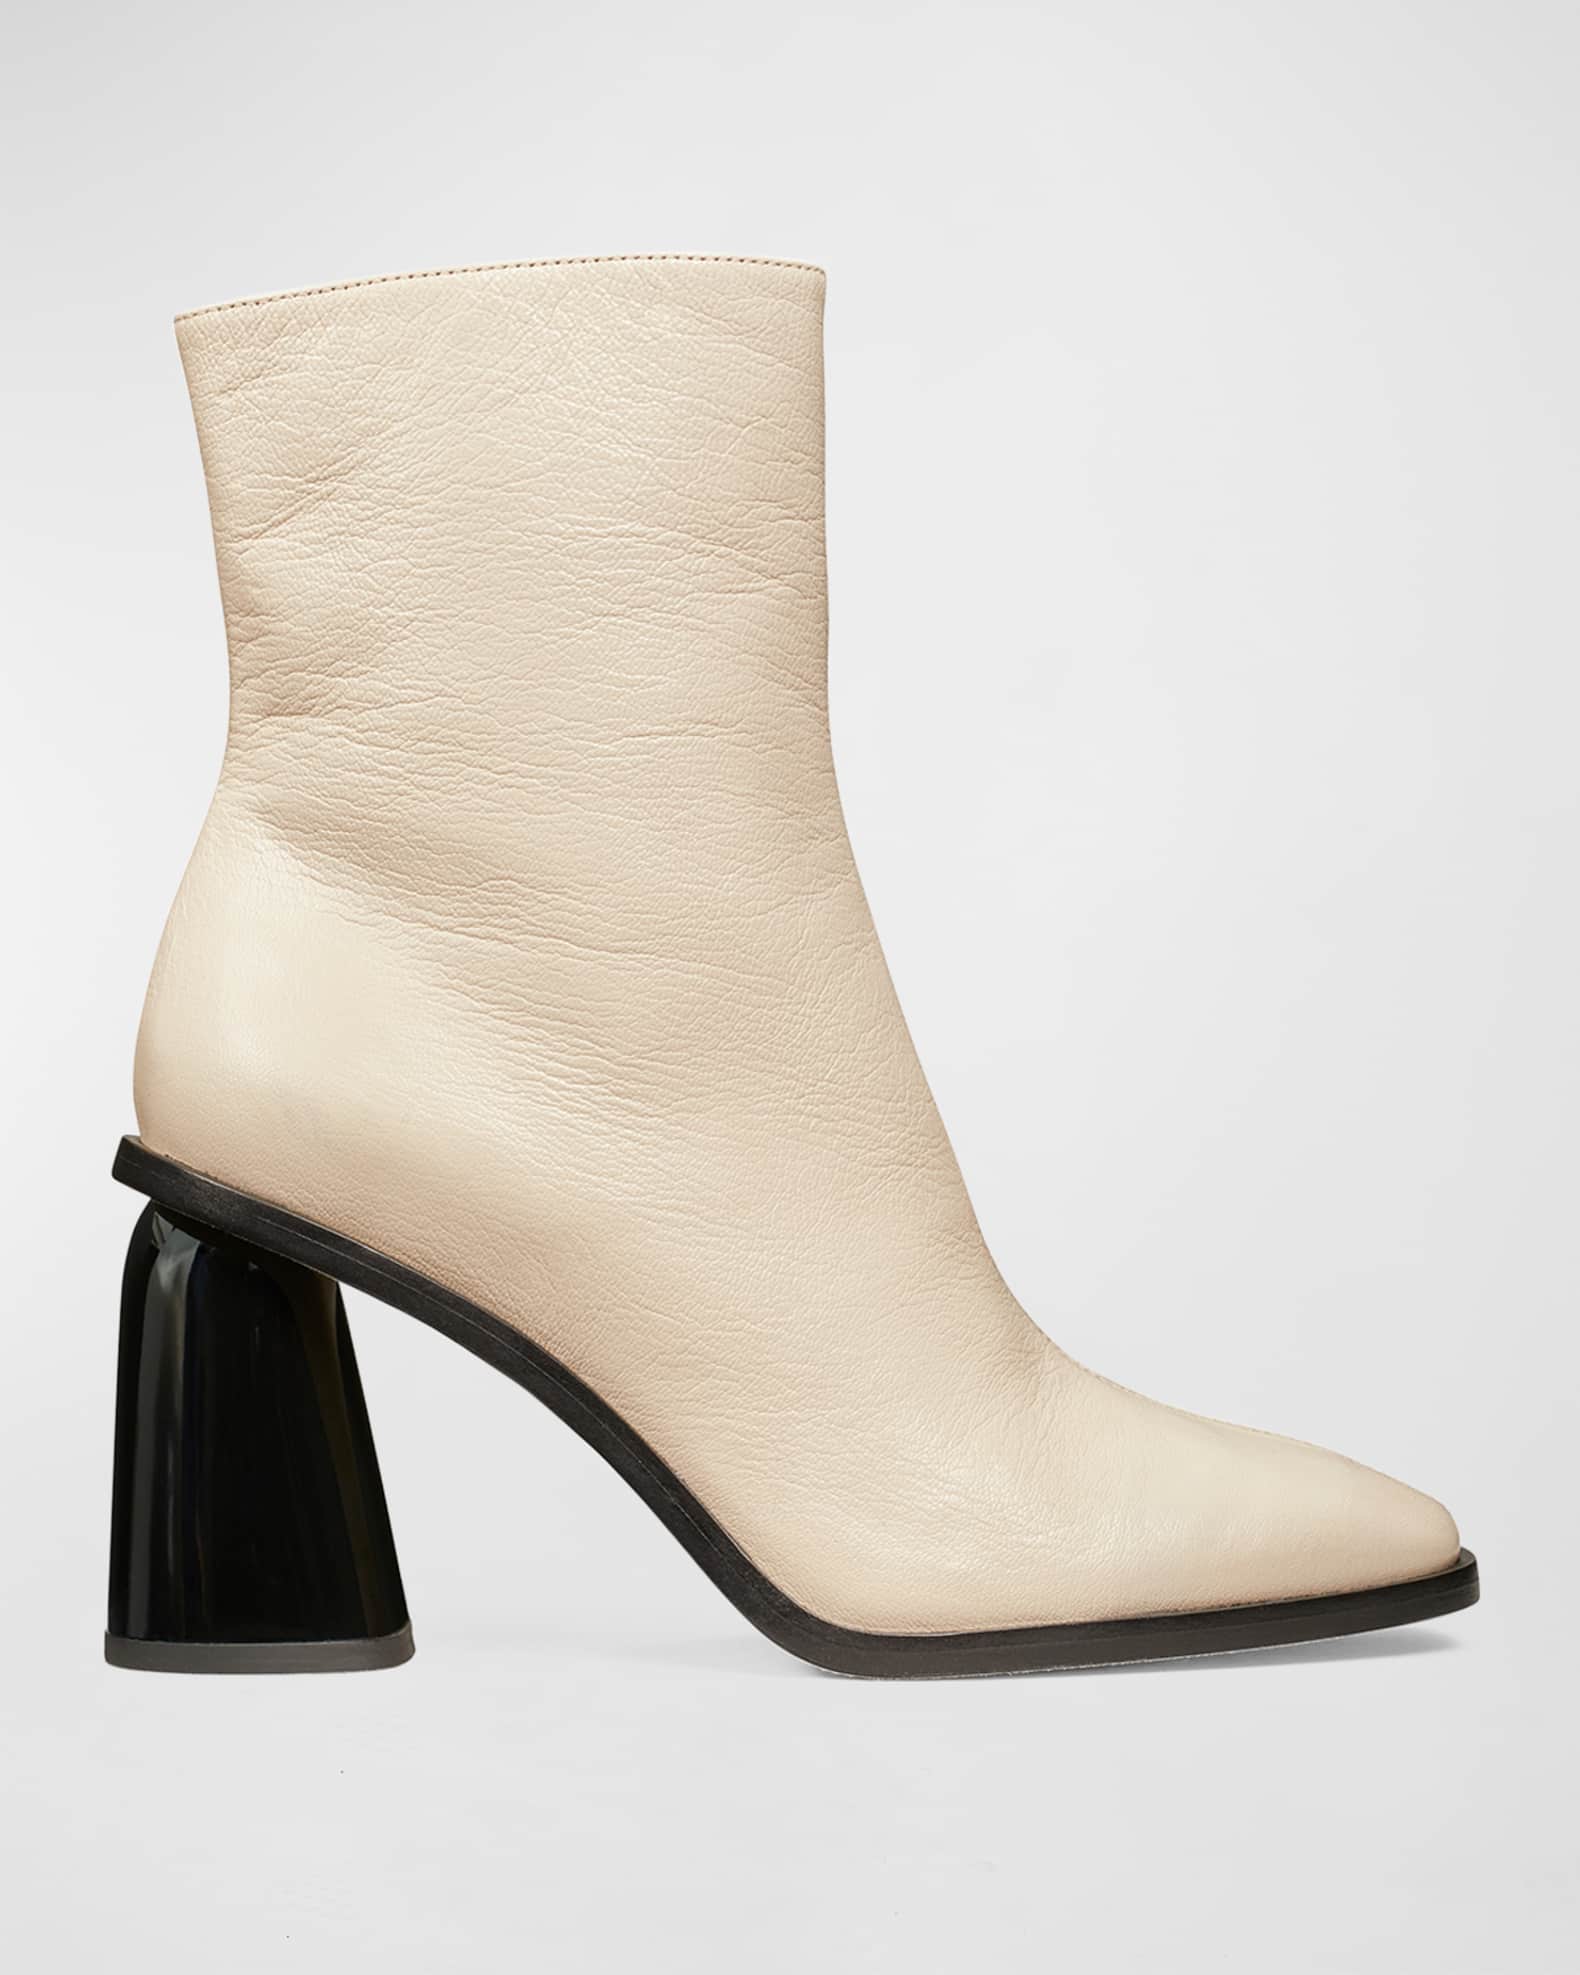 Tory Burch Leather Block-Heel Ankle Boots | Neiman Marcus